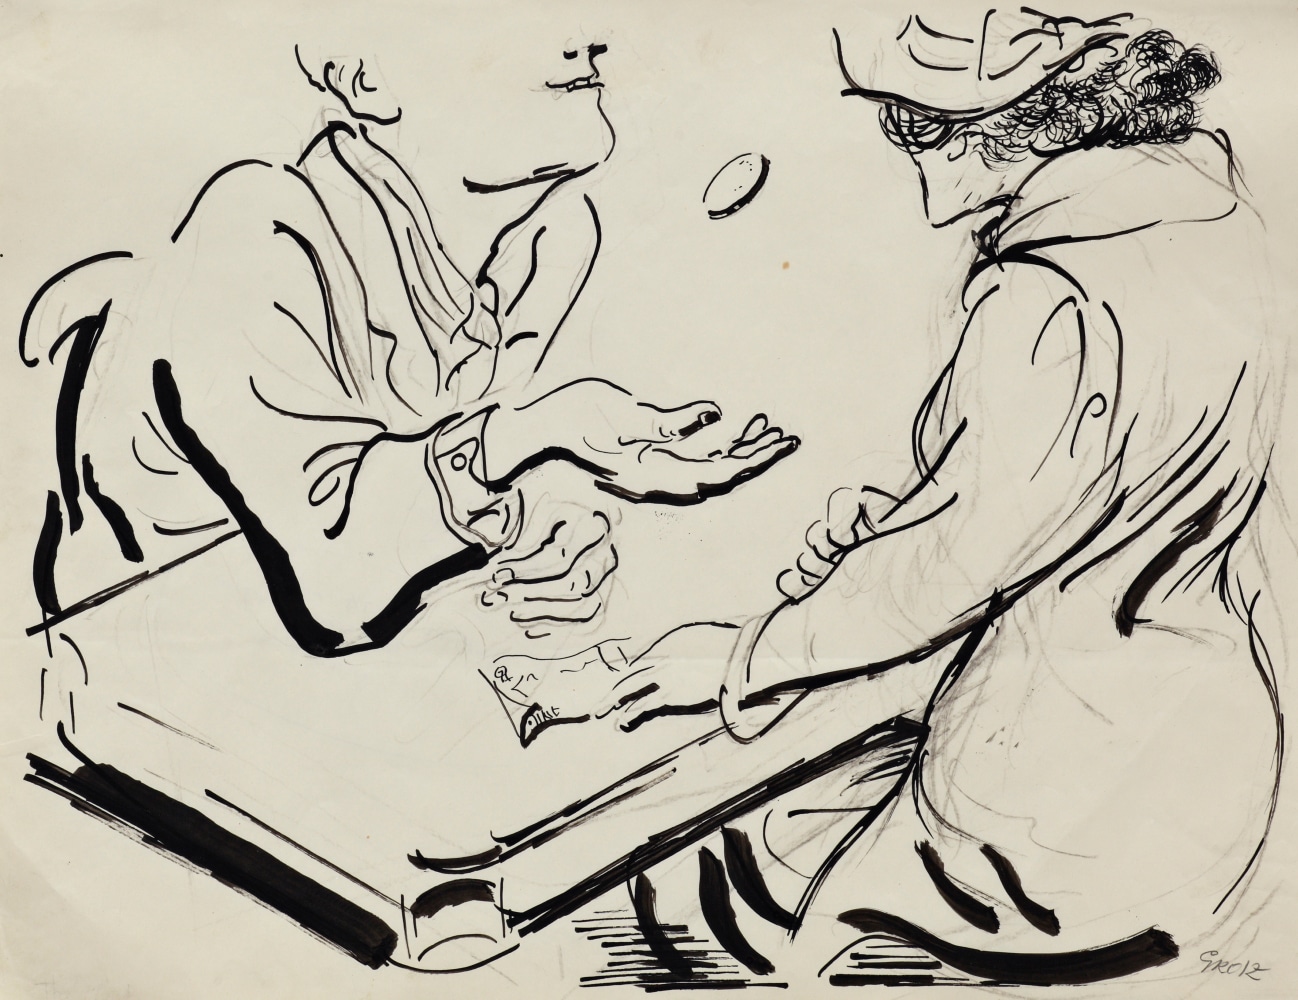 George&amp;nbsp;Grosz (1893&amp;ndash;1959)
The Cheat&amp;#39;s Remorse, 1937
Ink and chalk on paper
18 x 23 1/2&amp;nbsp;in. (46&amp;nbsp;x 59&amp;nbsp;cm)

&amp;nbsp;

Drawing for&amp;nbsp;Esquire, October 1937, p. 75, for Morley Callaghan&amp;#39;s story of the same title.